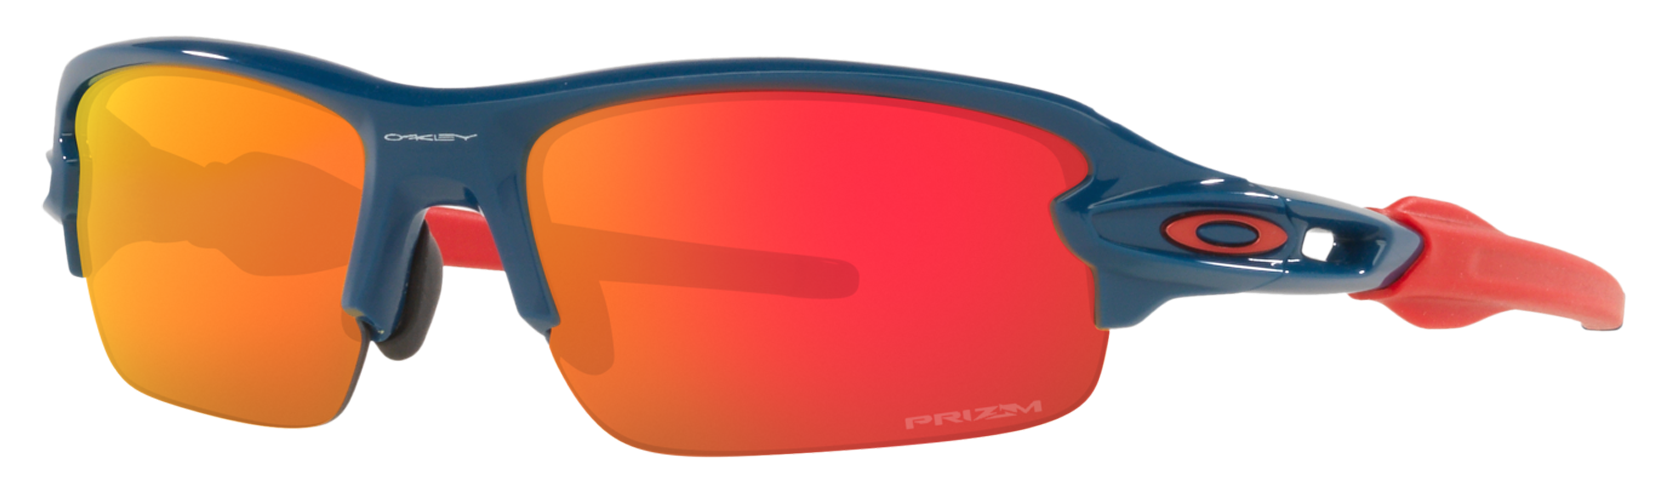 Oakley Flak XXS youth sport sunglasses in navy blue with PRIZM red orange lenses.